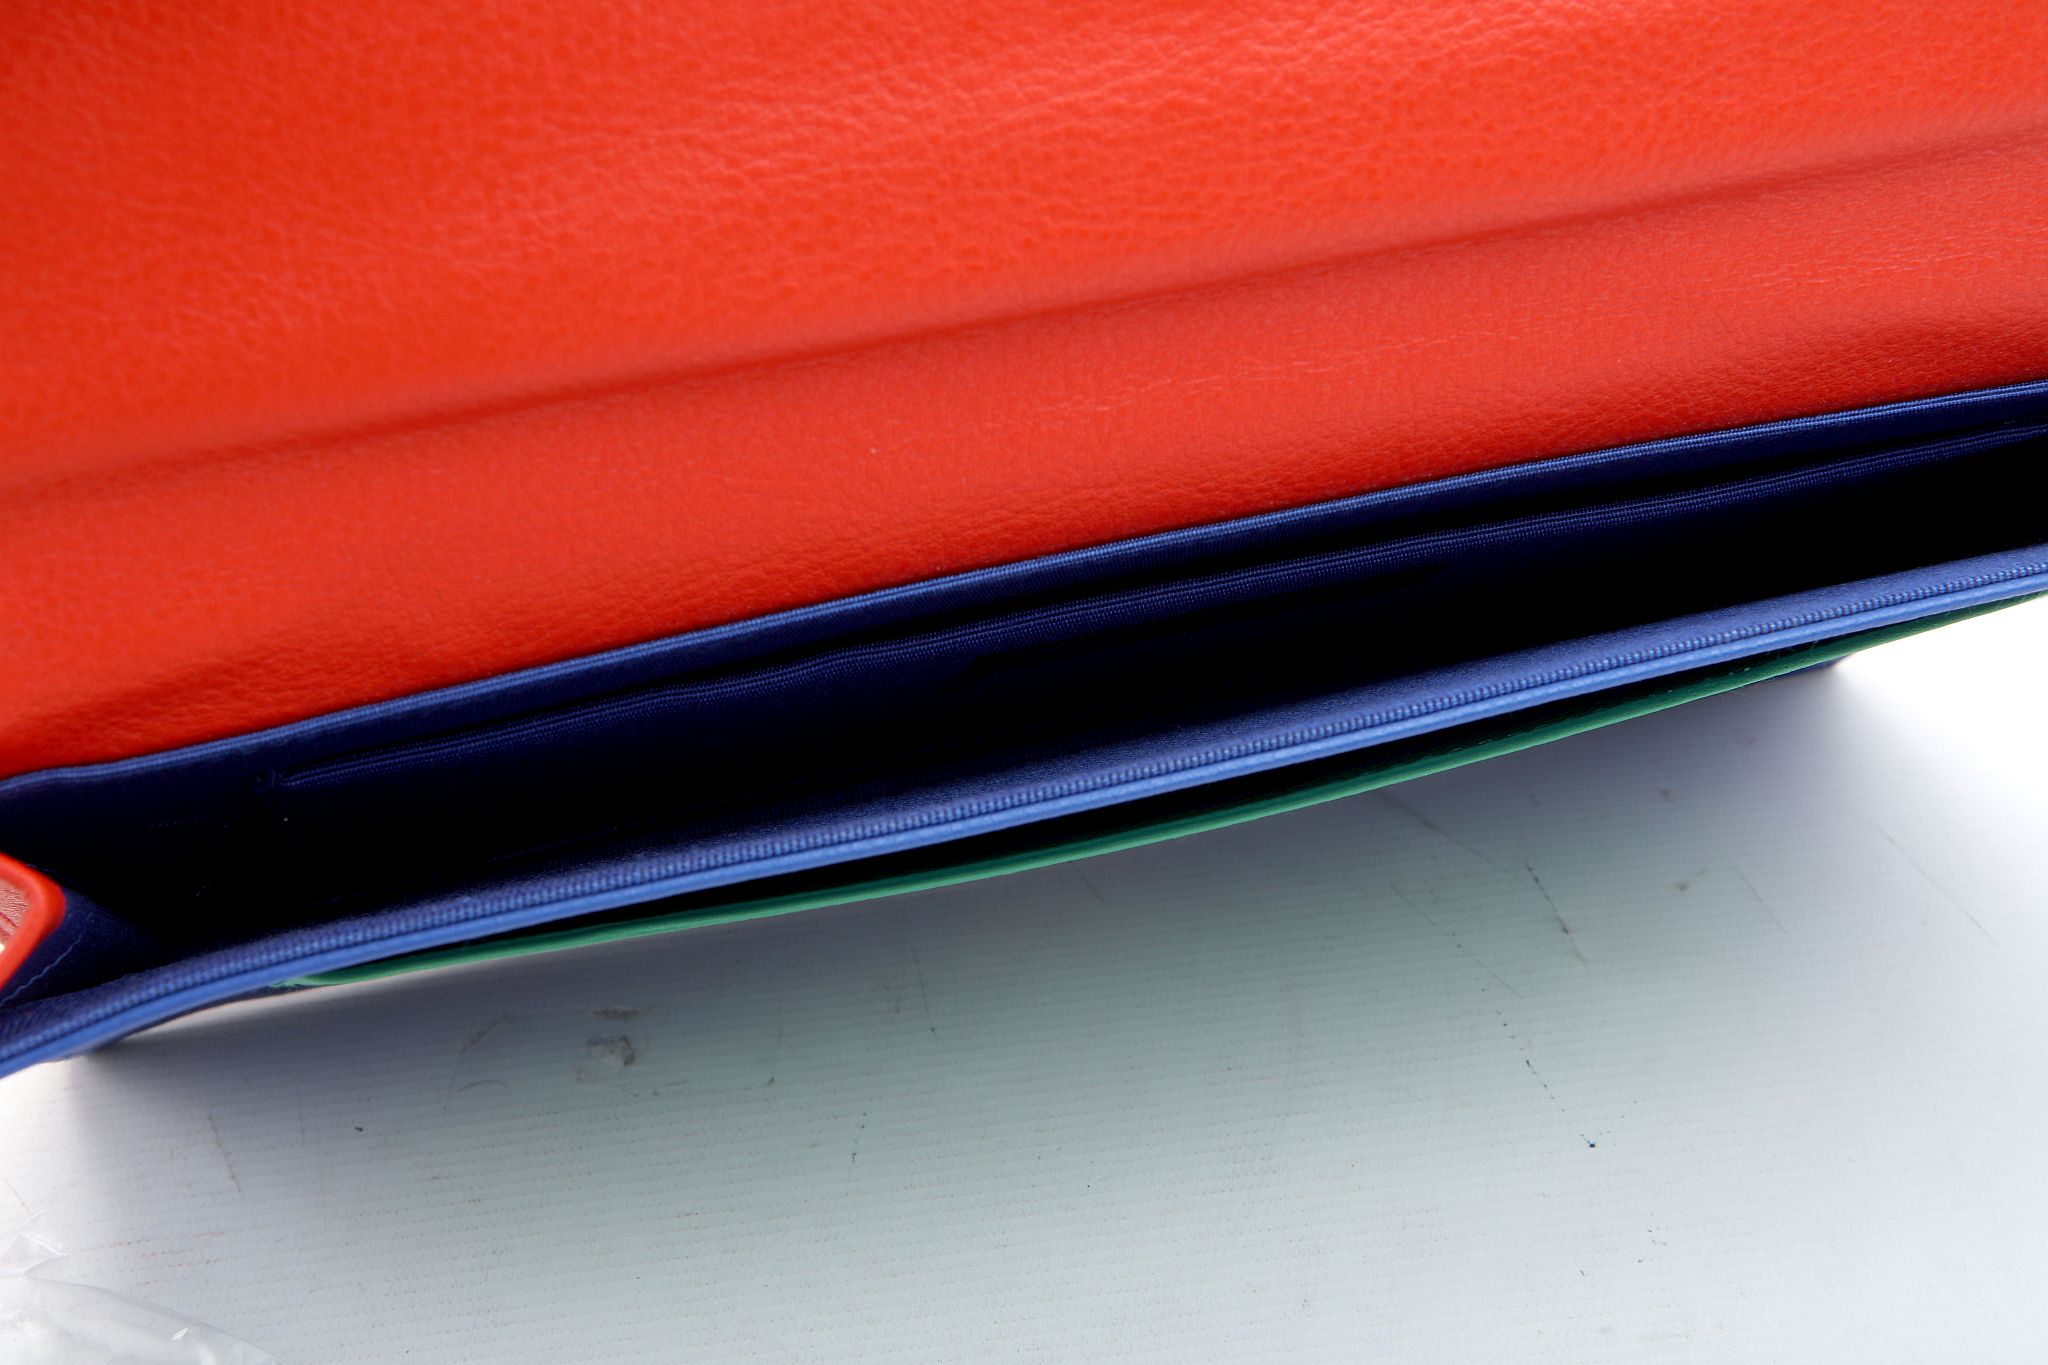 TWO 1980s CLUTCH BAGS, one red Louis Feraud example, the other Ivorie de Balmain multicoloured - Image 9 of 26